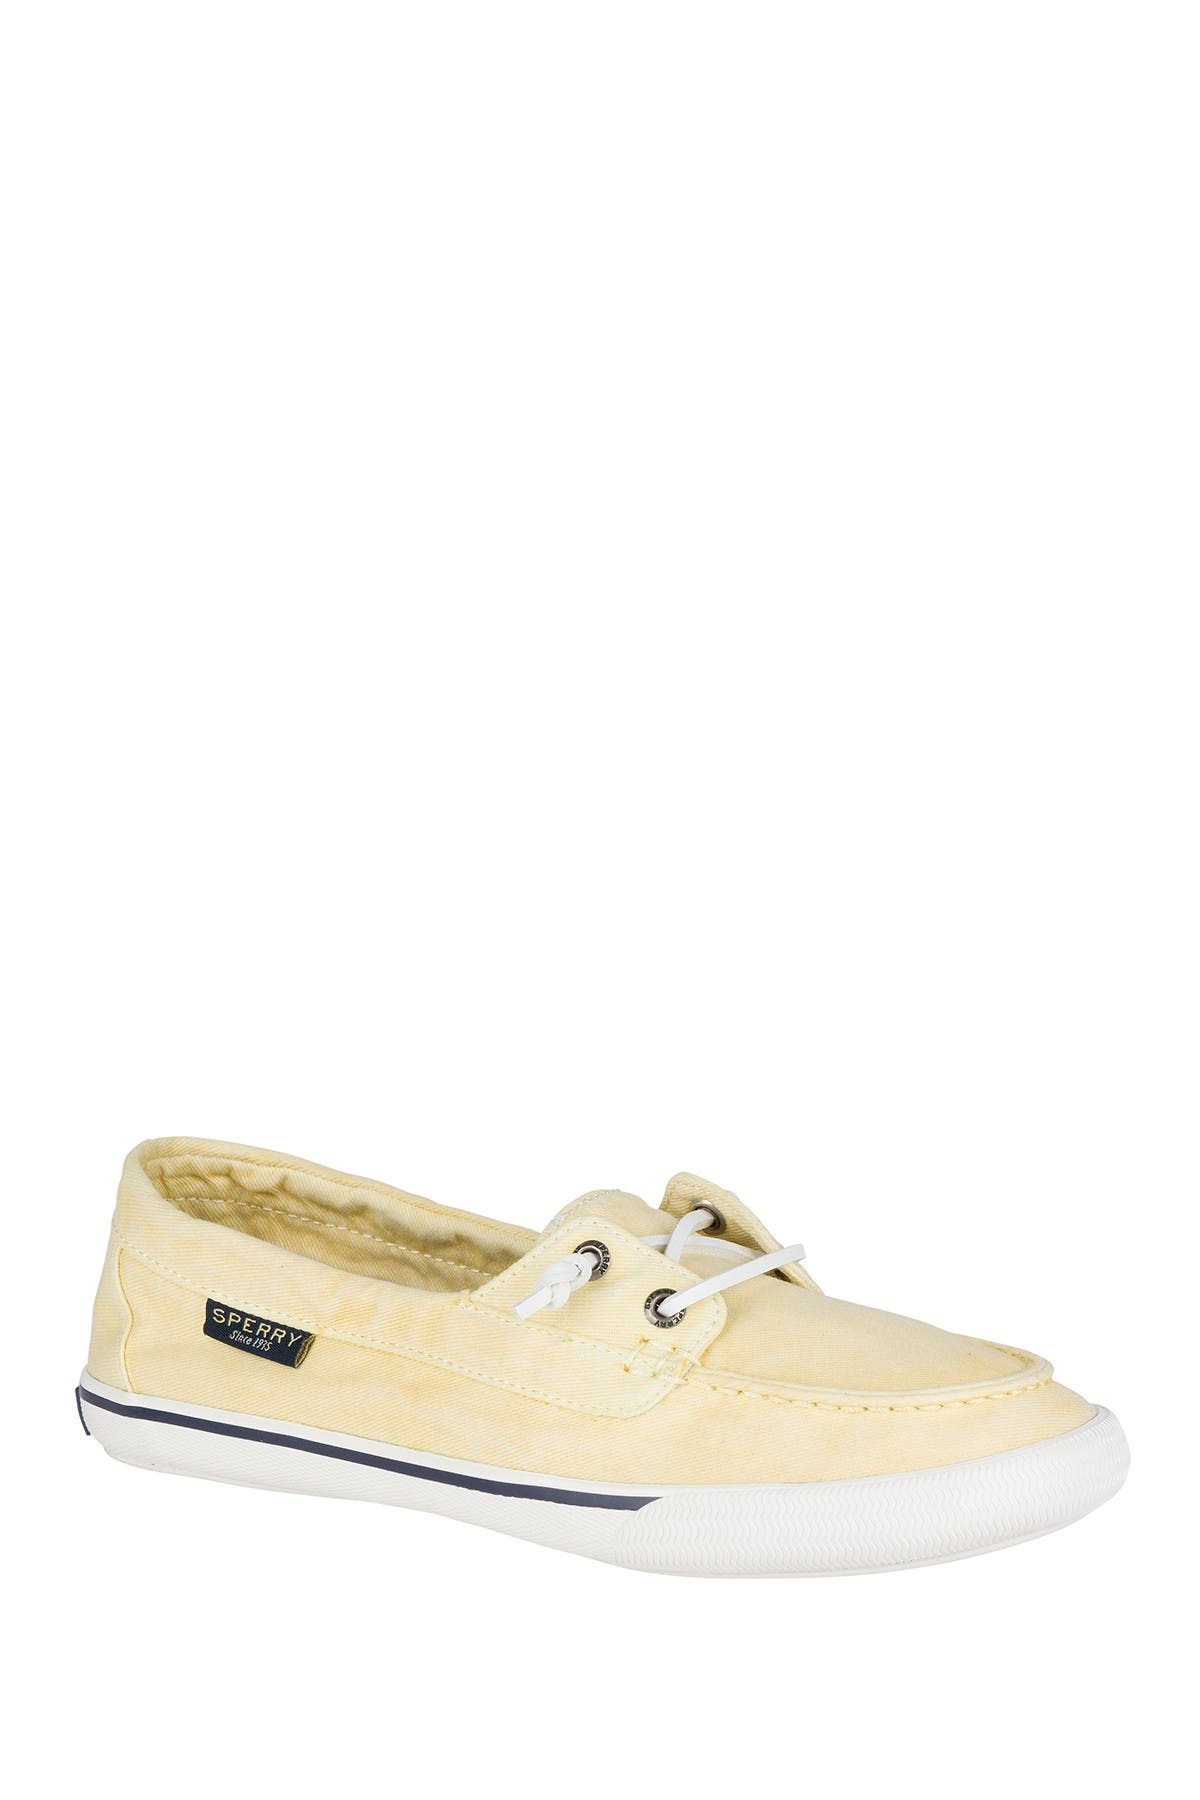 sperry lounge away shoes